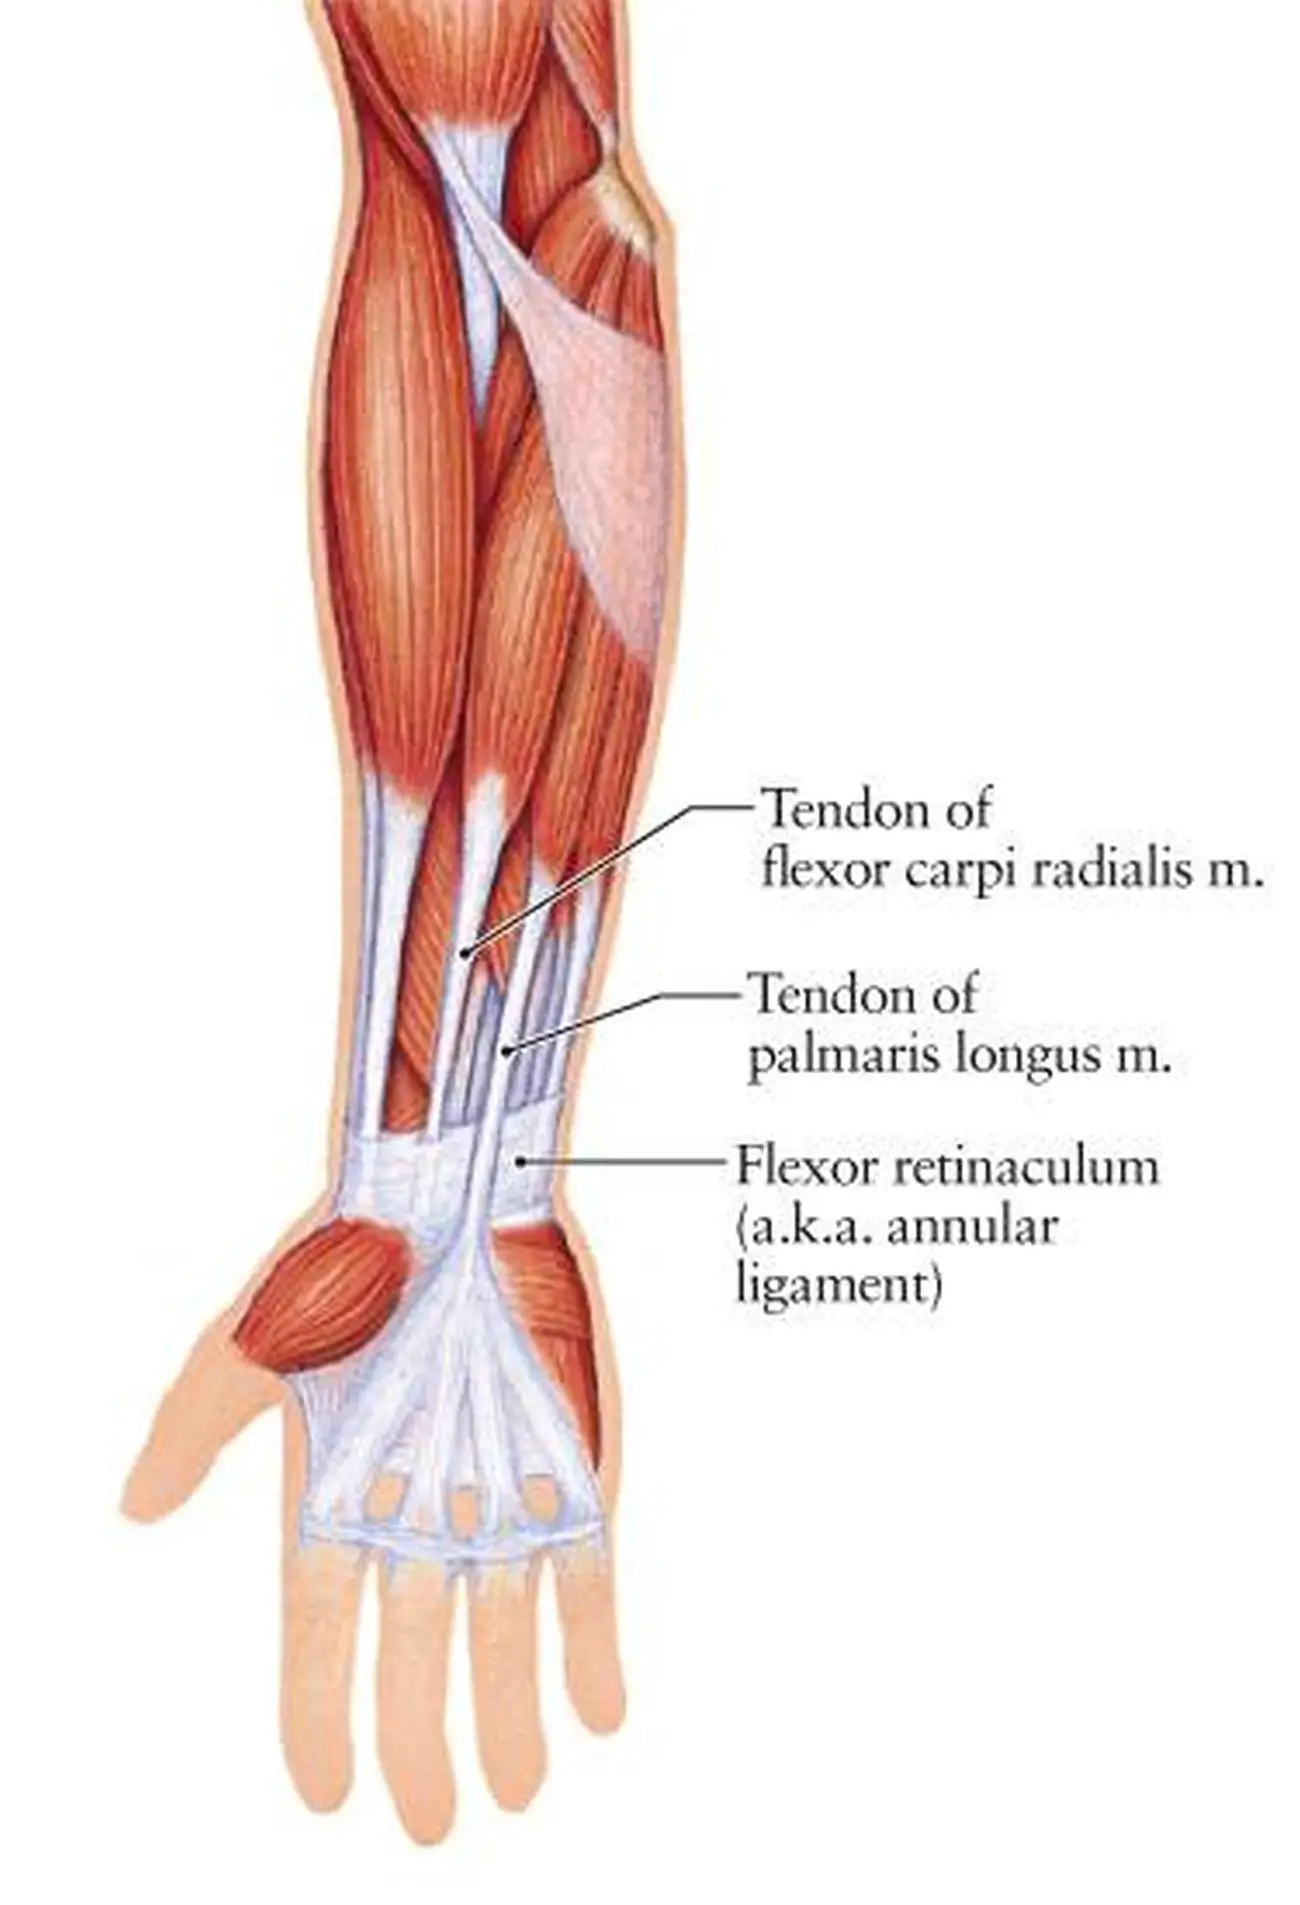 Pictures Of Anular Ligament